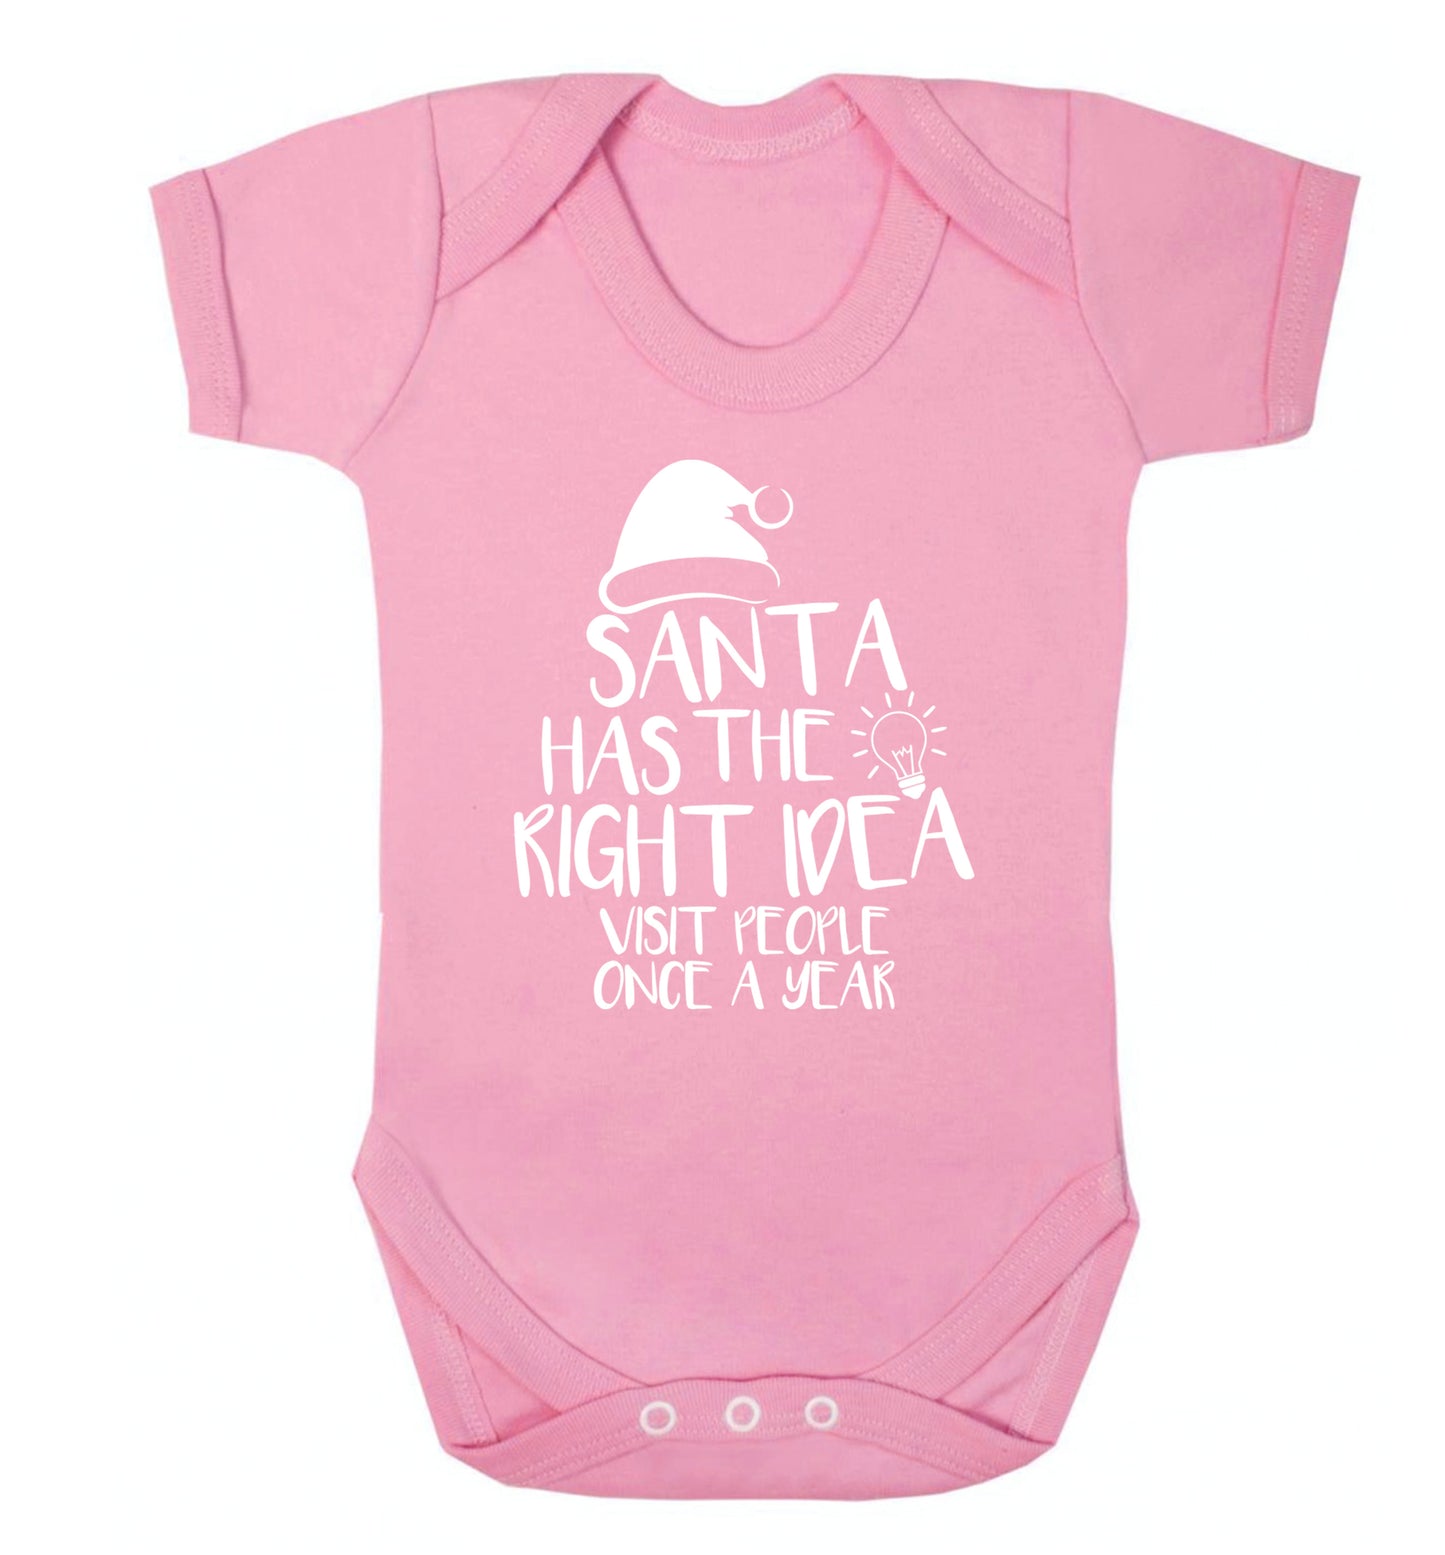 Santa has the right idea visit people once a year Baby Vest pale pink 18-24 months